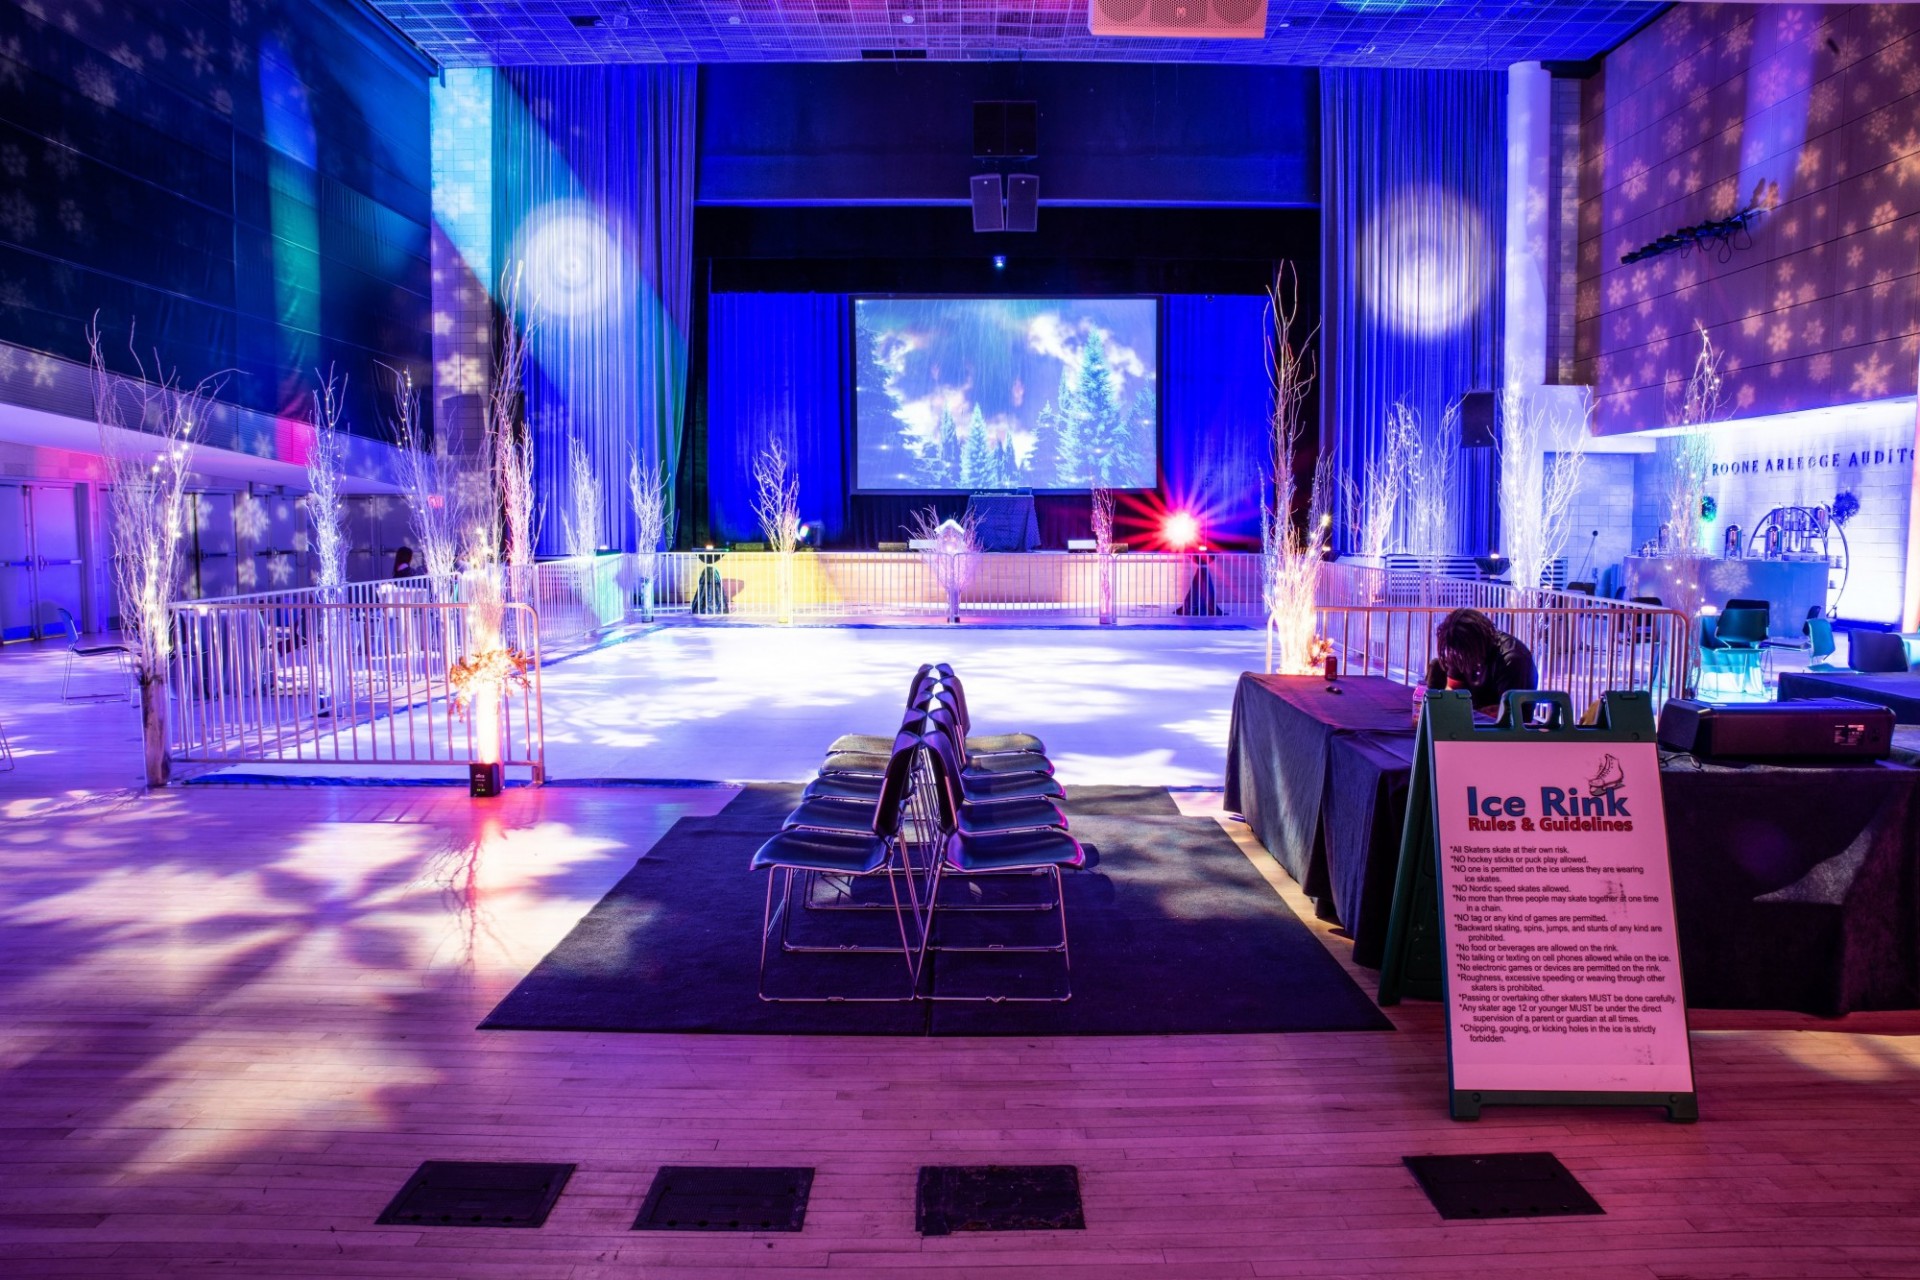 An indoor ice rink set up for a holiday party